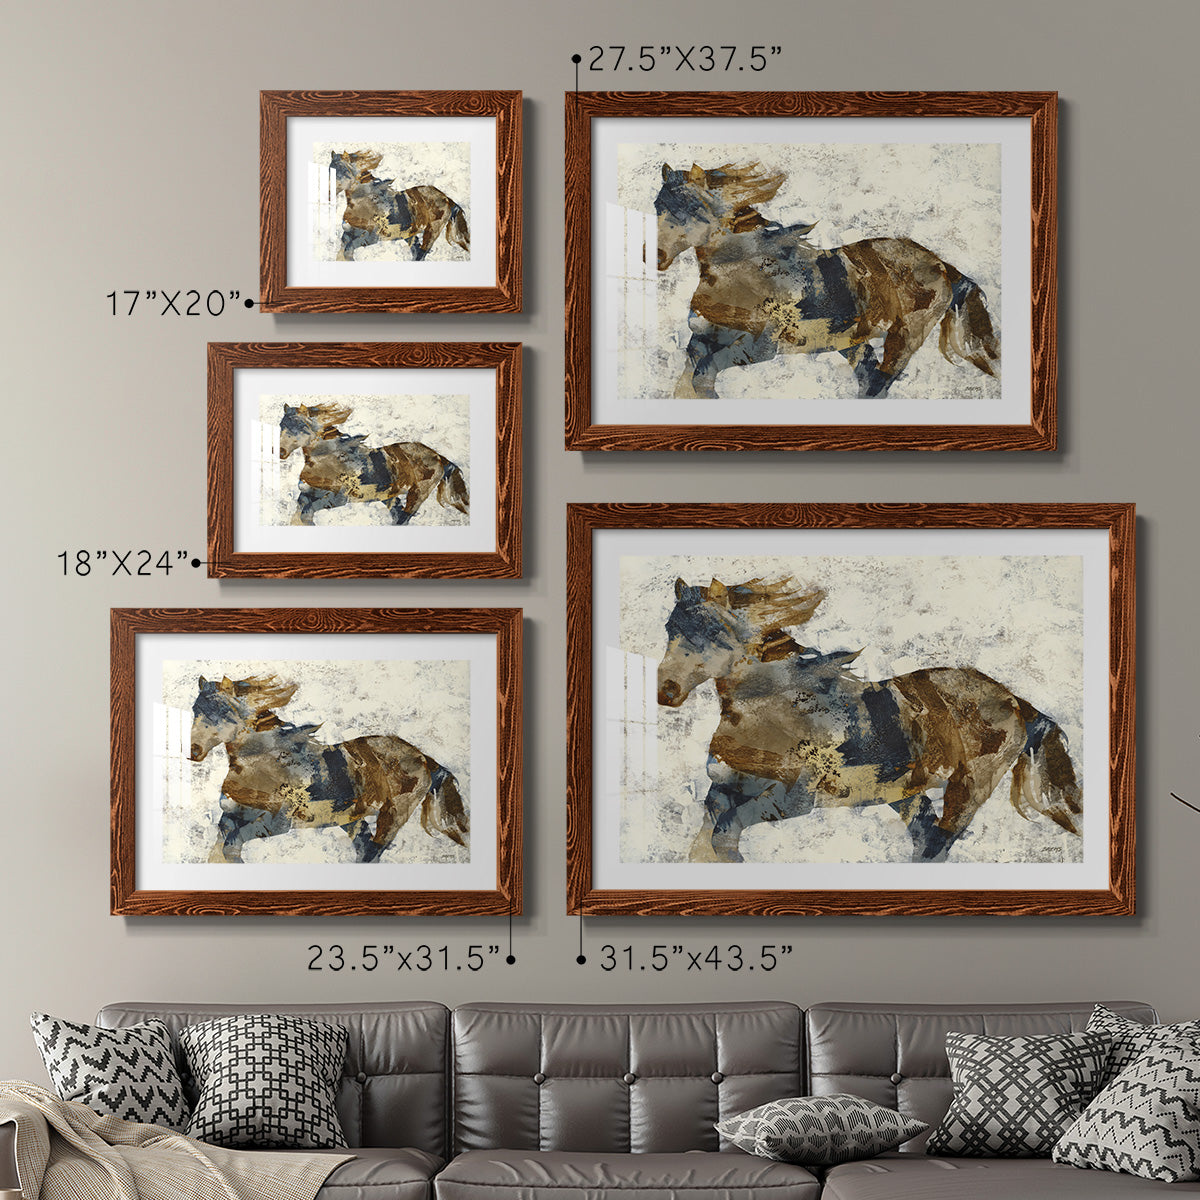 Gallop-Premium Framed Print - Ready to Hang